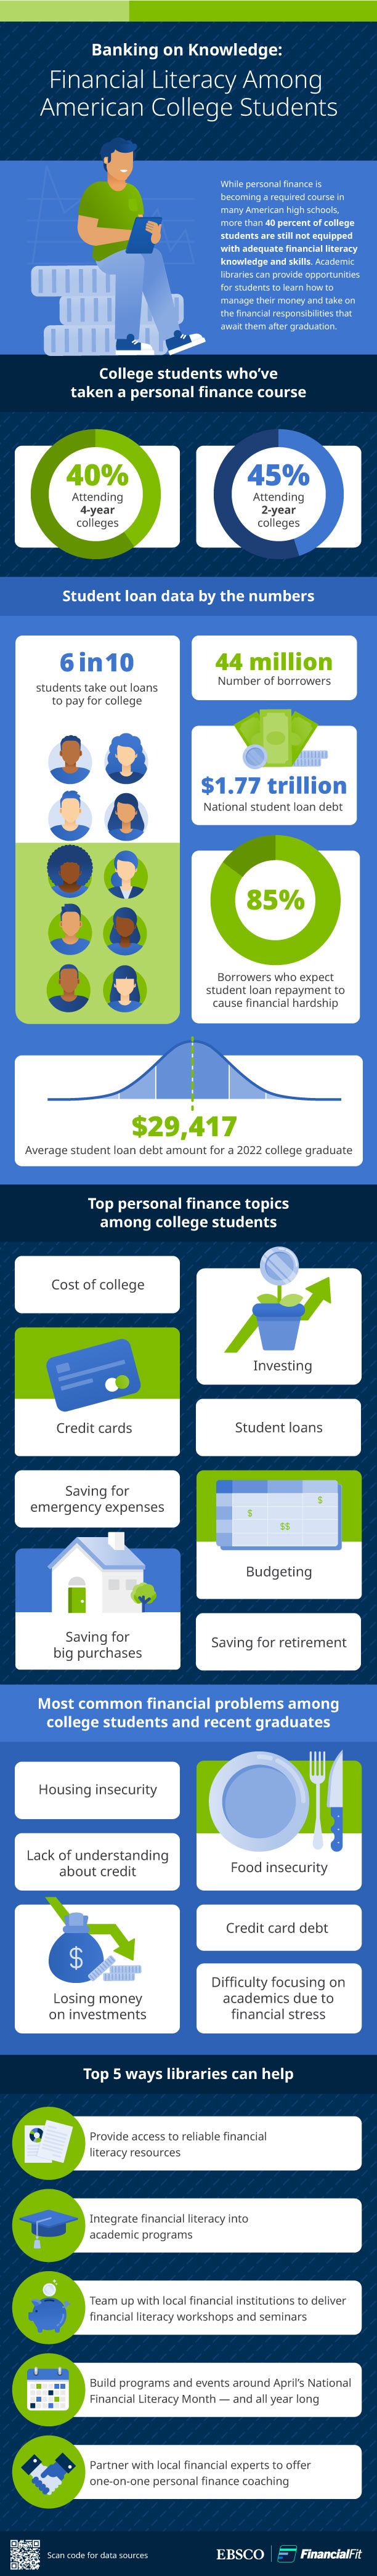 An infographic showing statistics about financial literacy among American college students